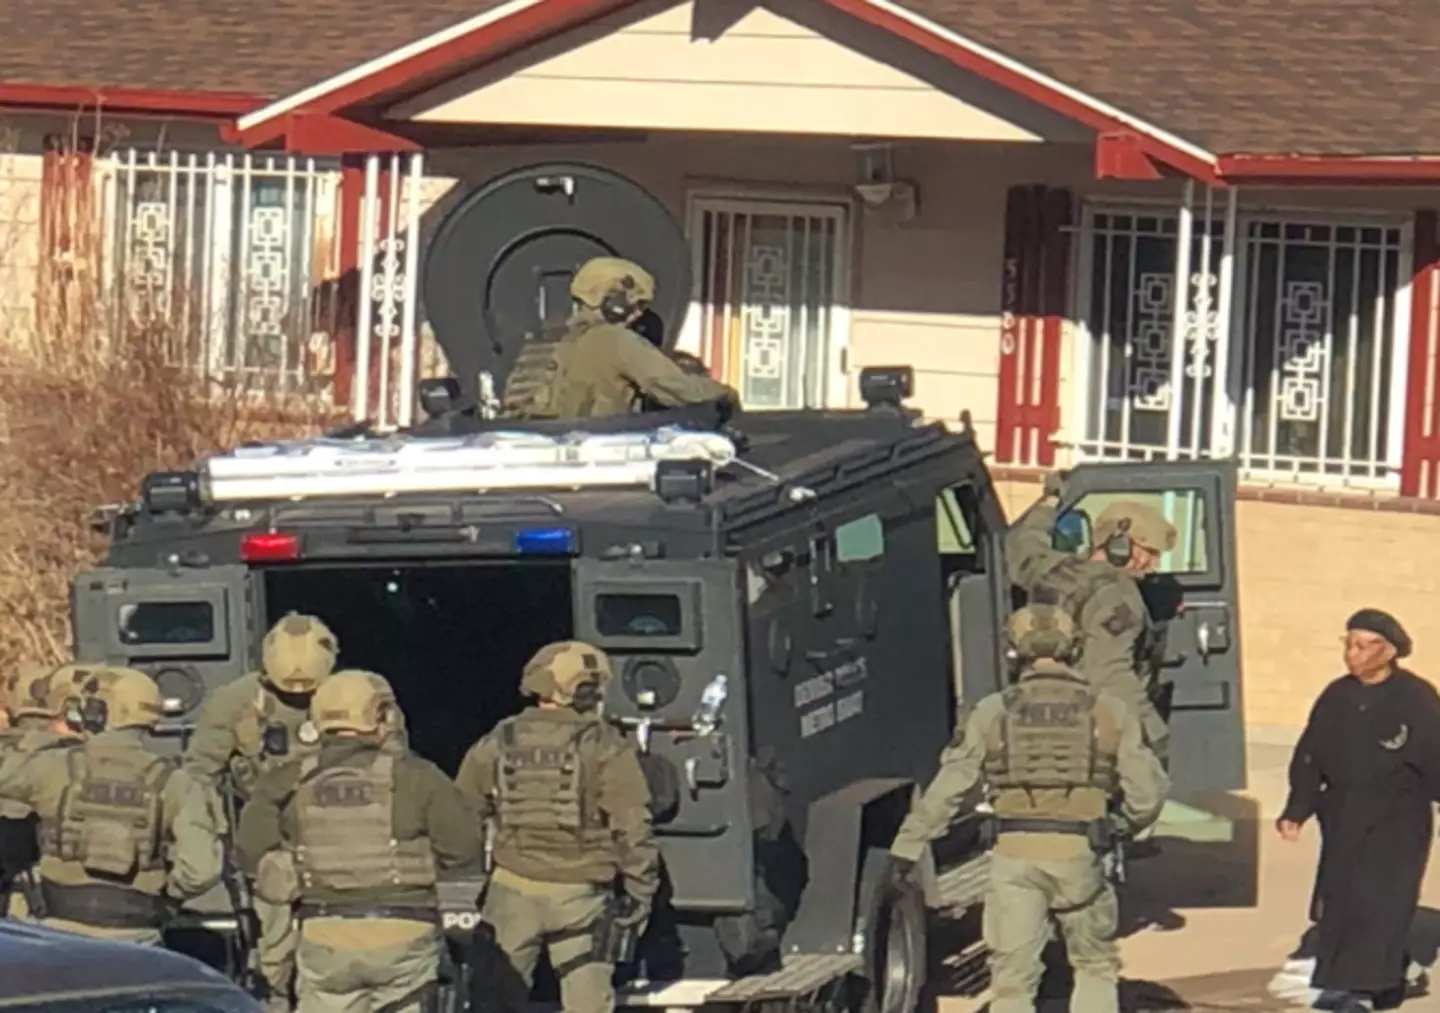 The SWAT team which showed up at Johnson's door.